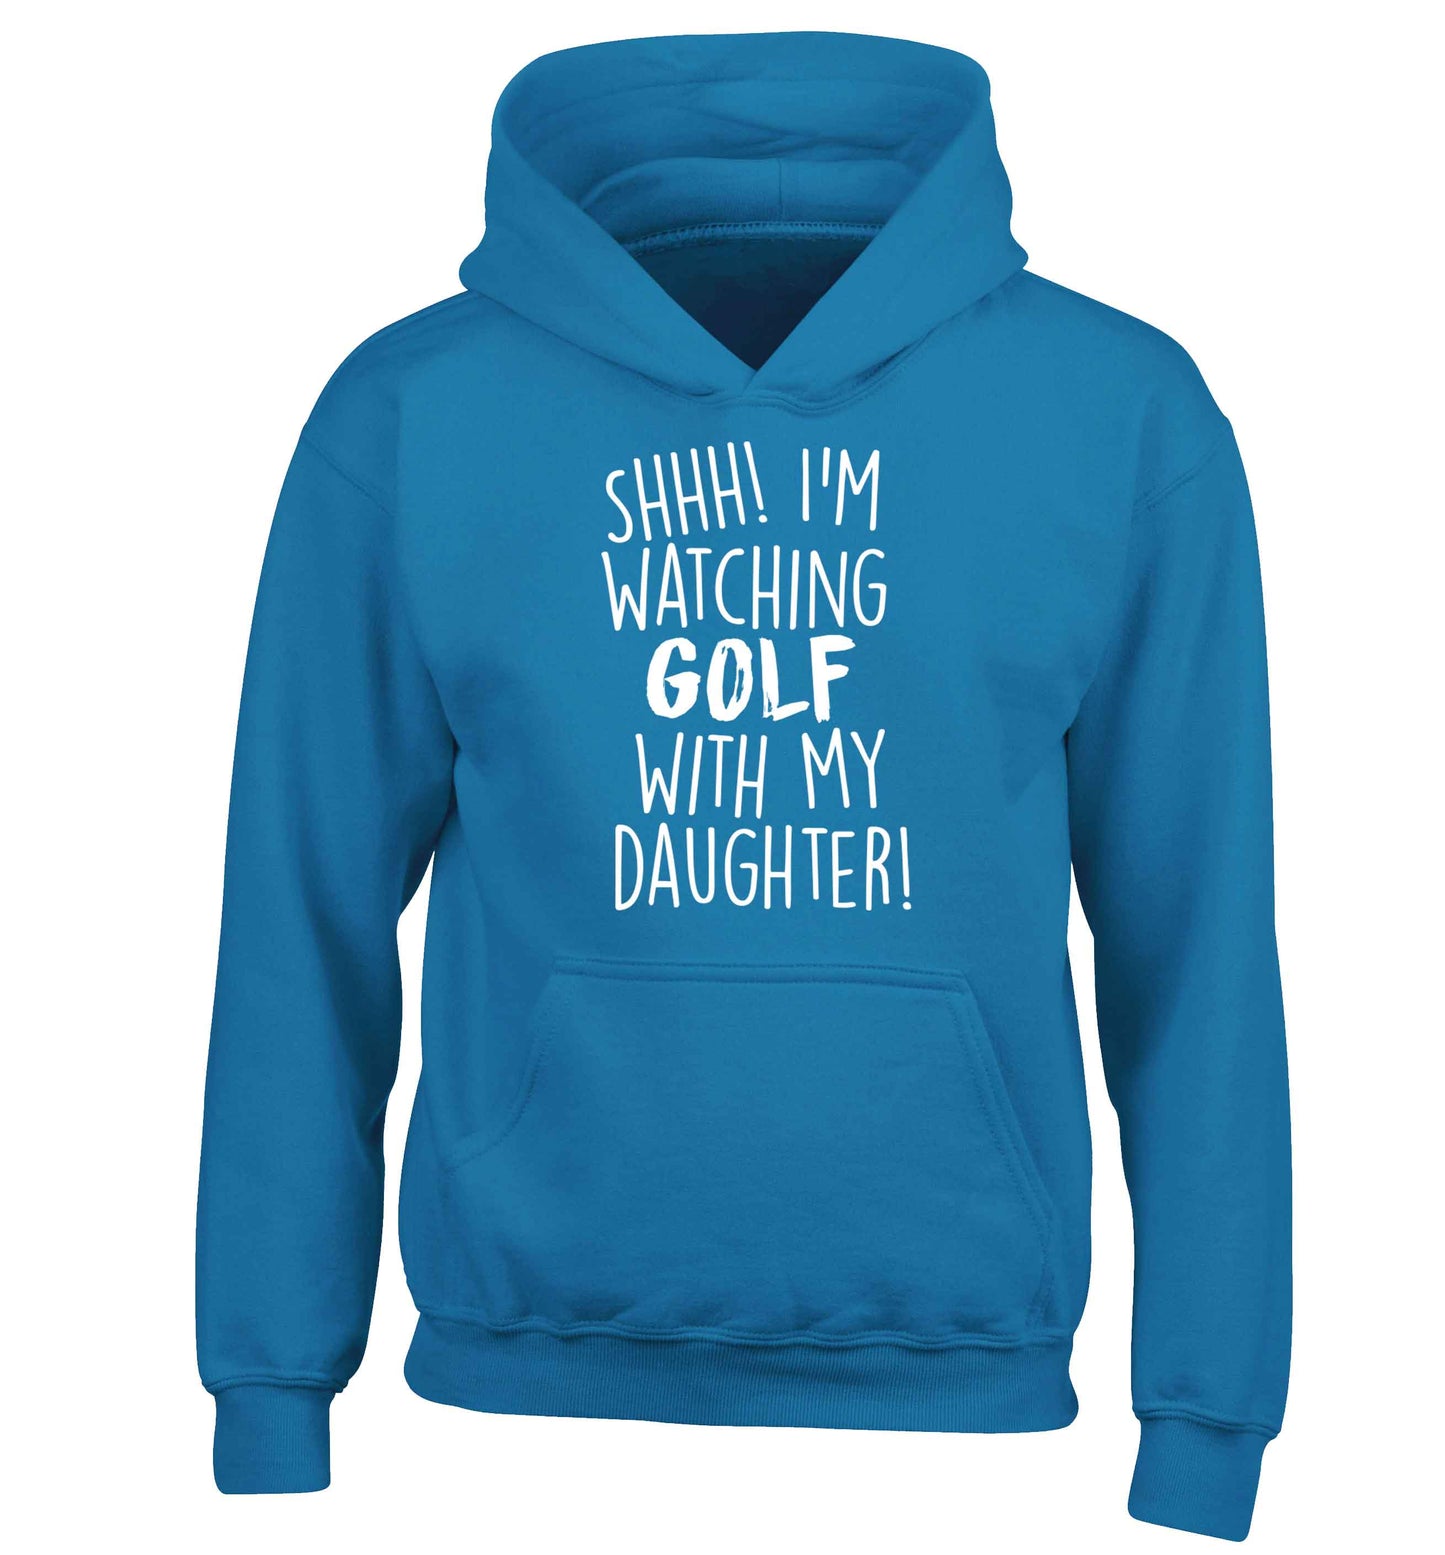 Shh I'm watching golf with my daughter children's blue hoodie 12-13 Years